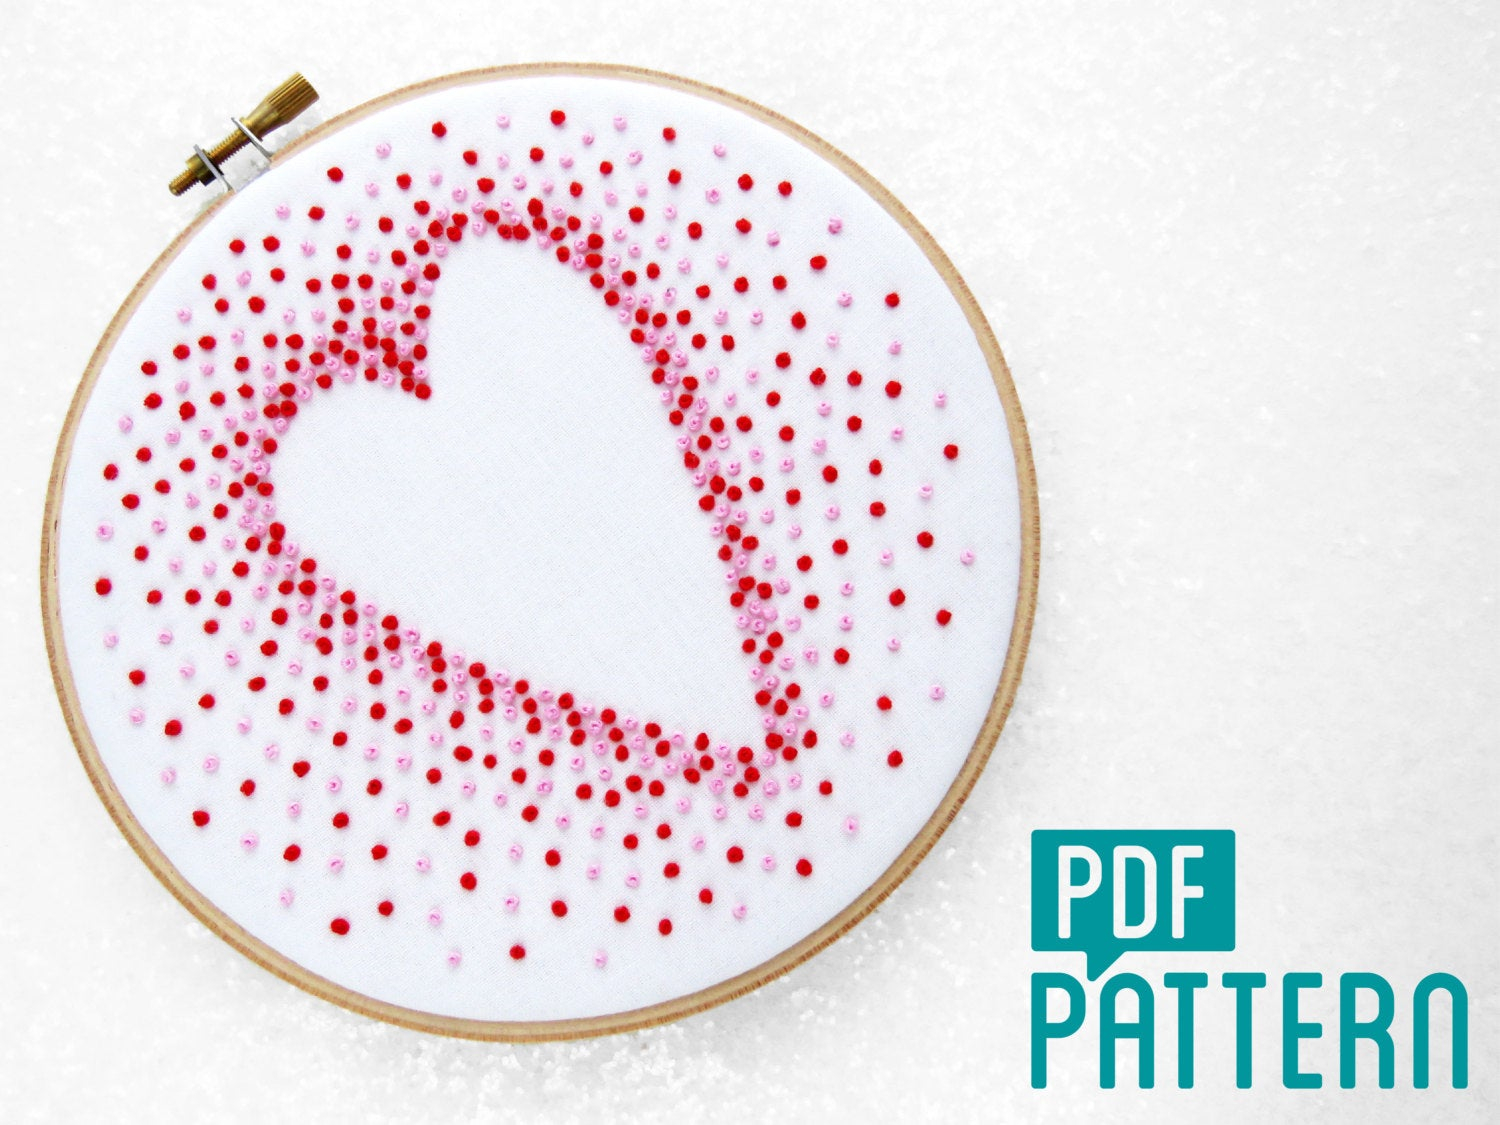 French Knots Embroidery Patterns French Knot Heart Embroidery Pattern Modern Needlework Pattern Diy Wedding Gift Diy Anniversay Gift Love Heart Hoop Art Turtorial Pdf